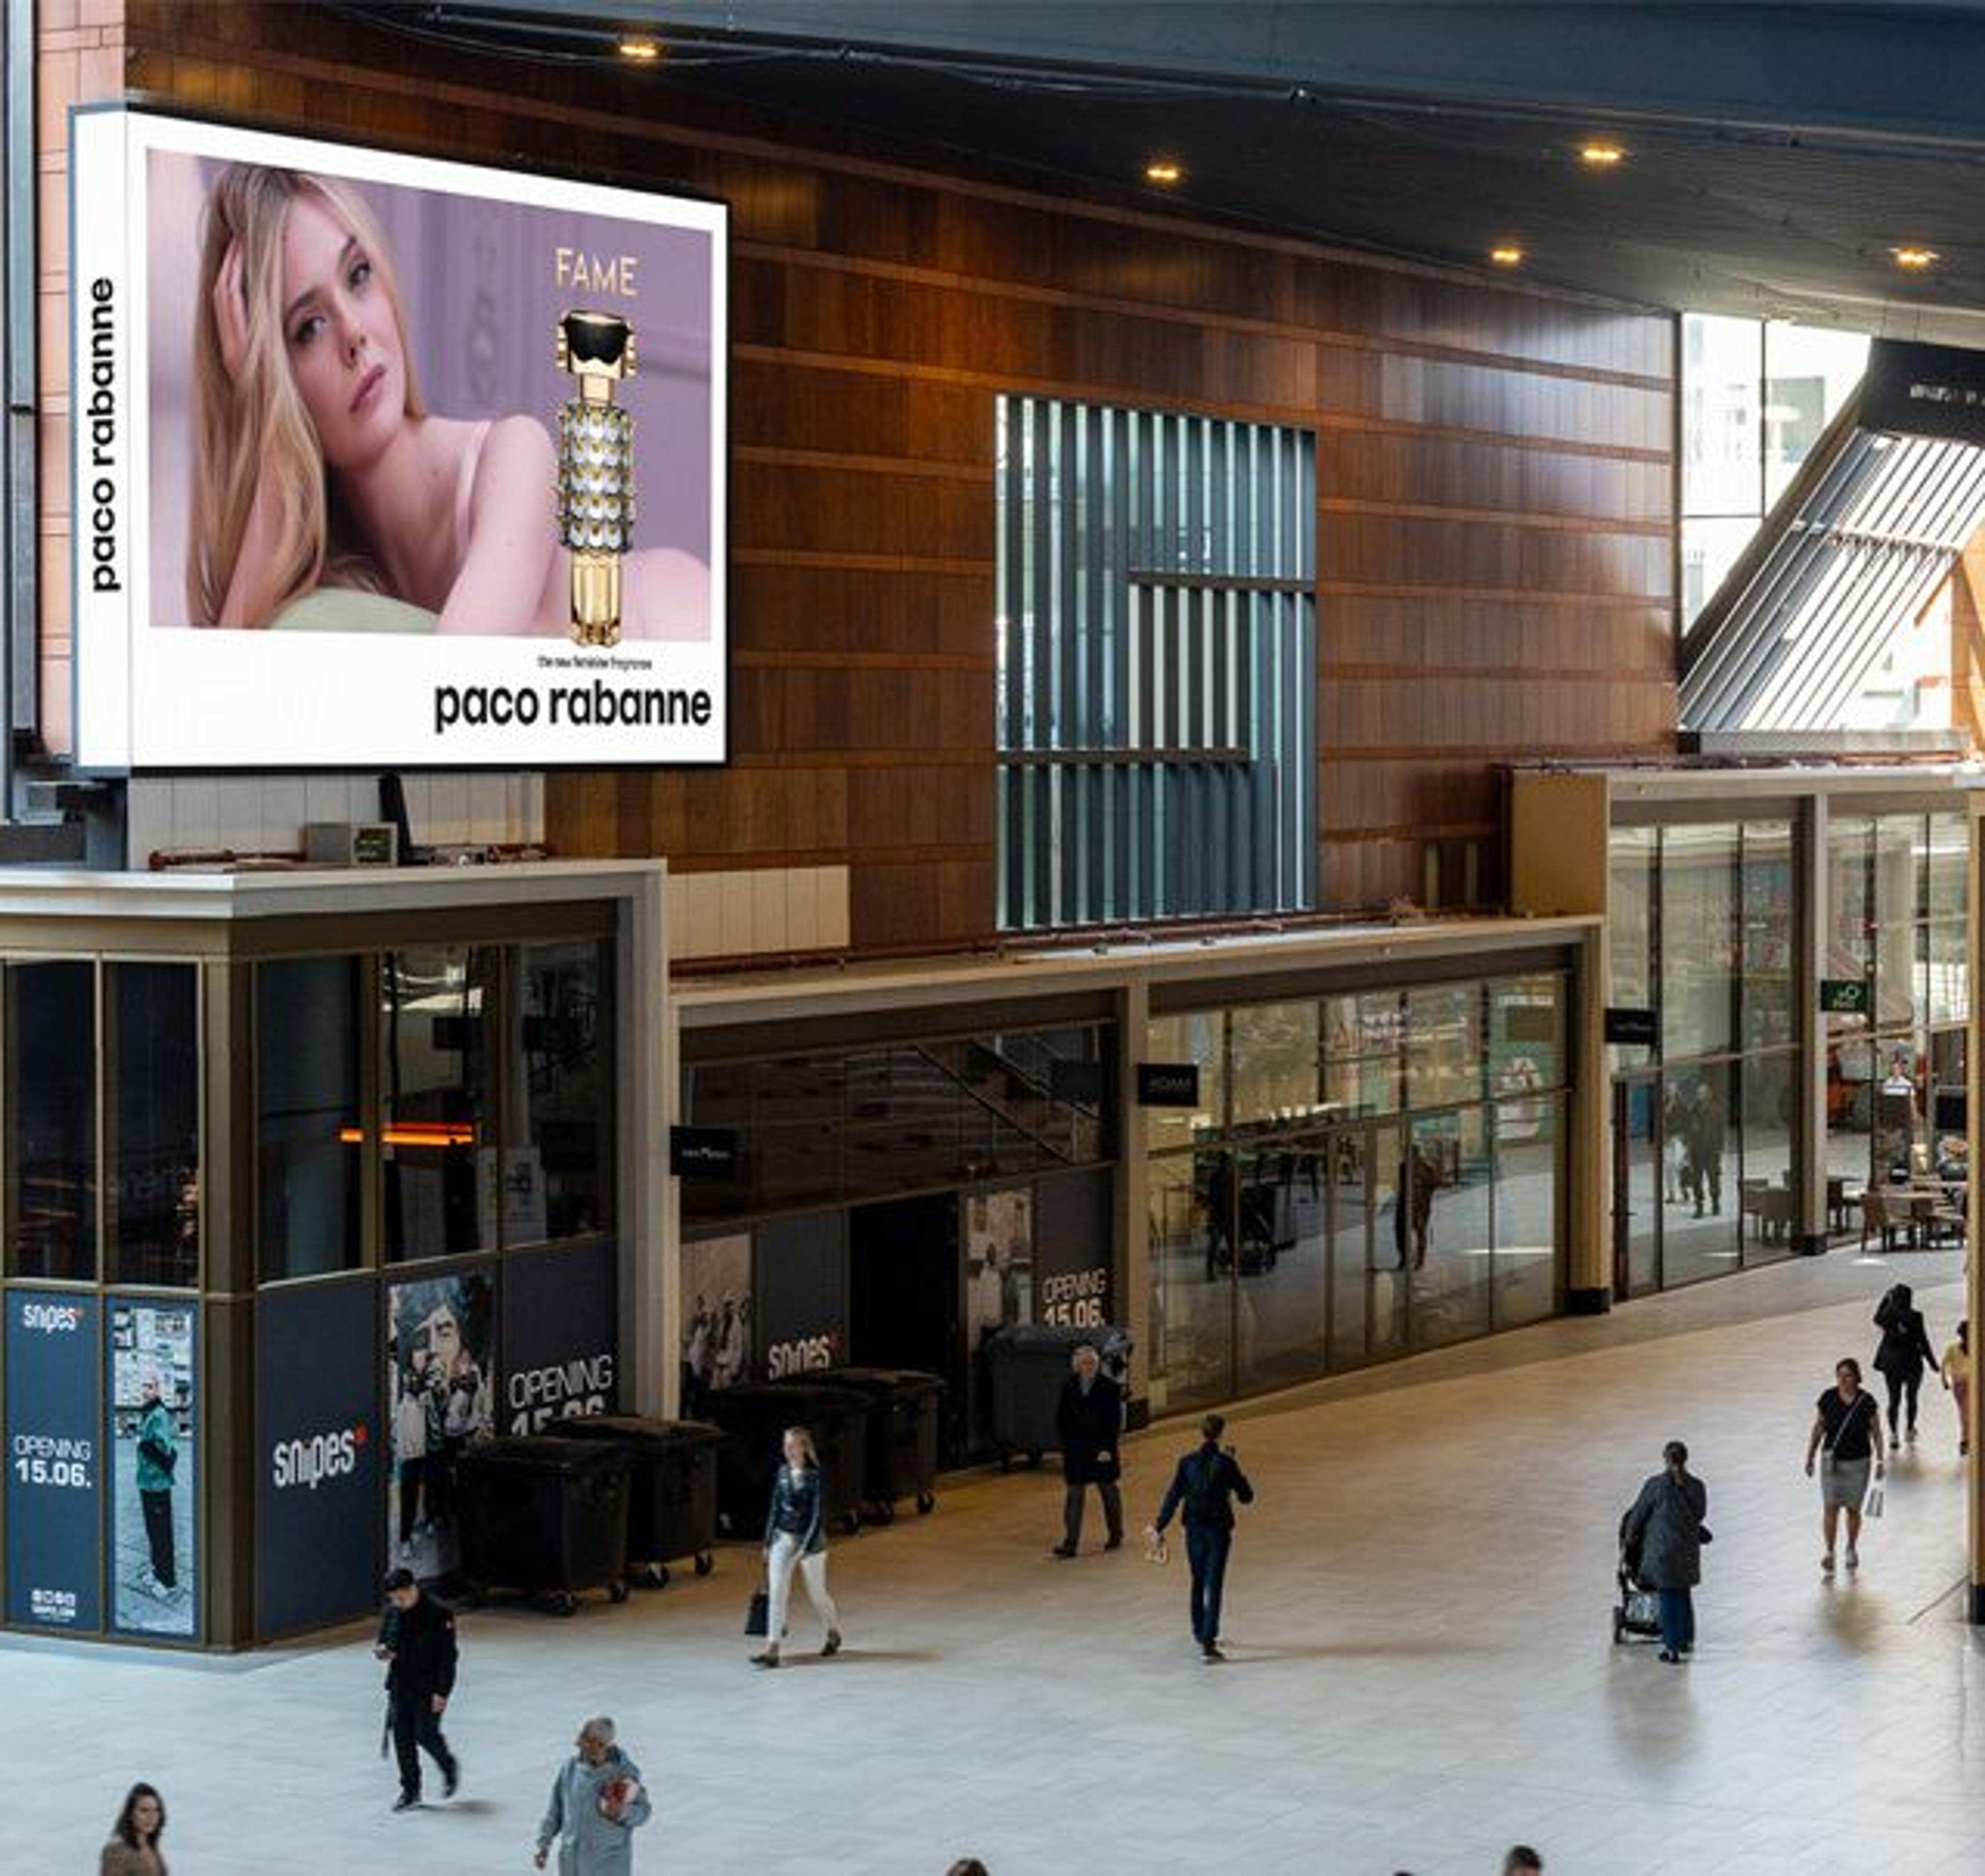 Ocean Outdoor adds large digital screens to Wereldhave Shopping Center network